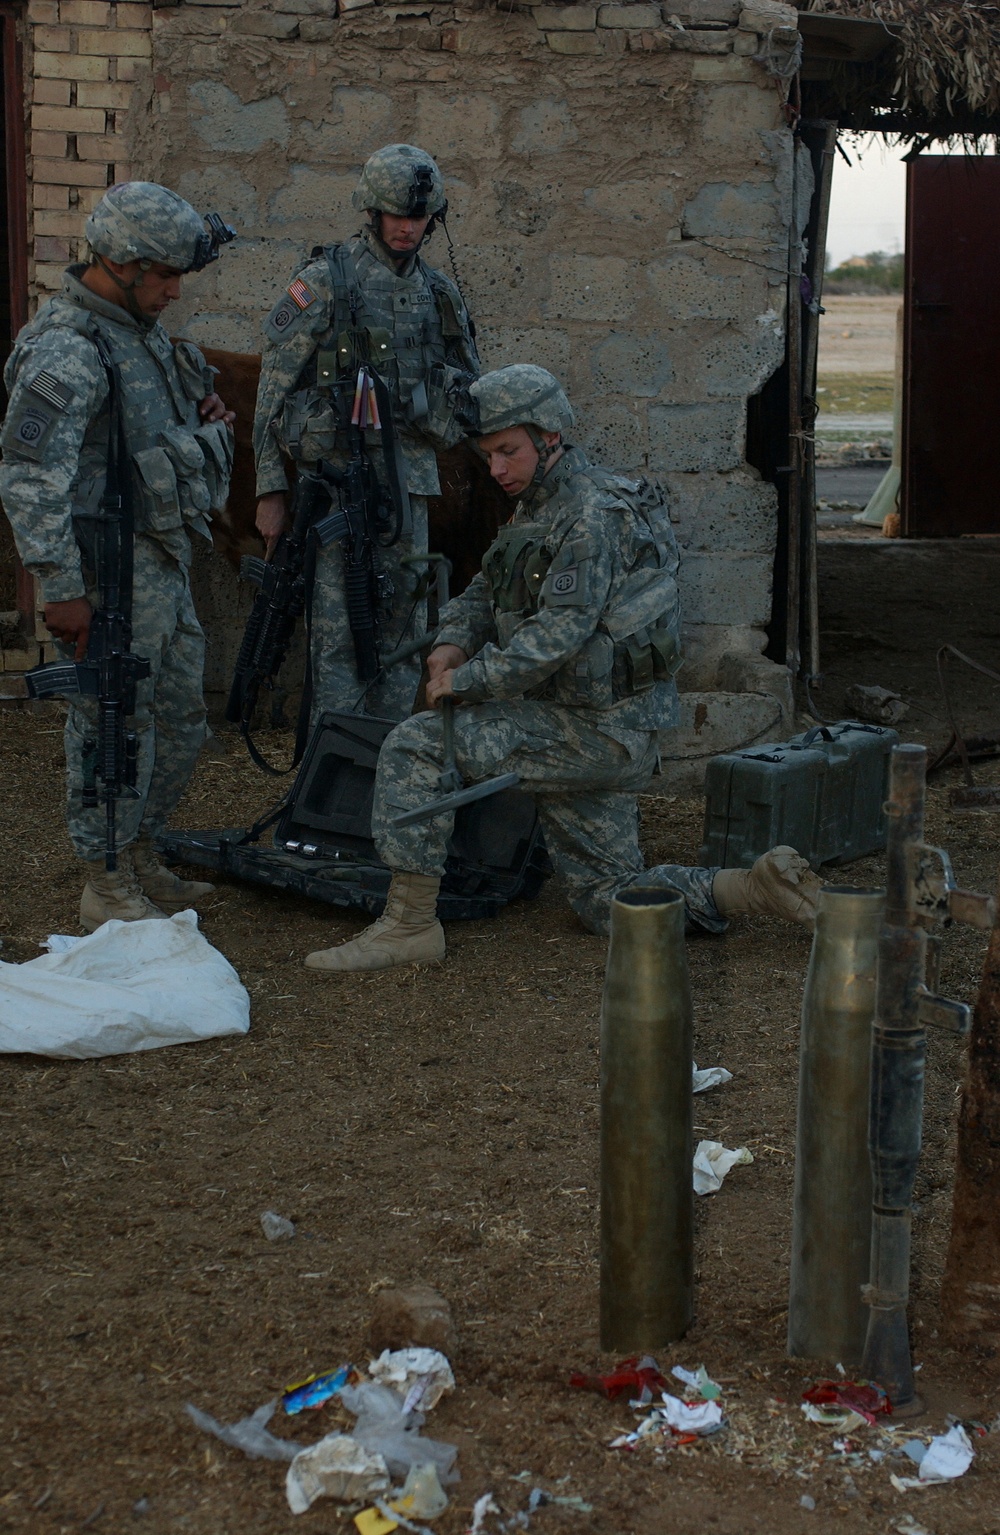 Soldiers search for weapons caches